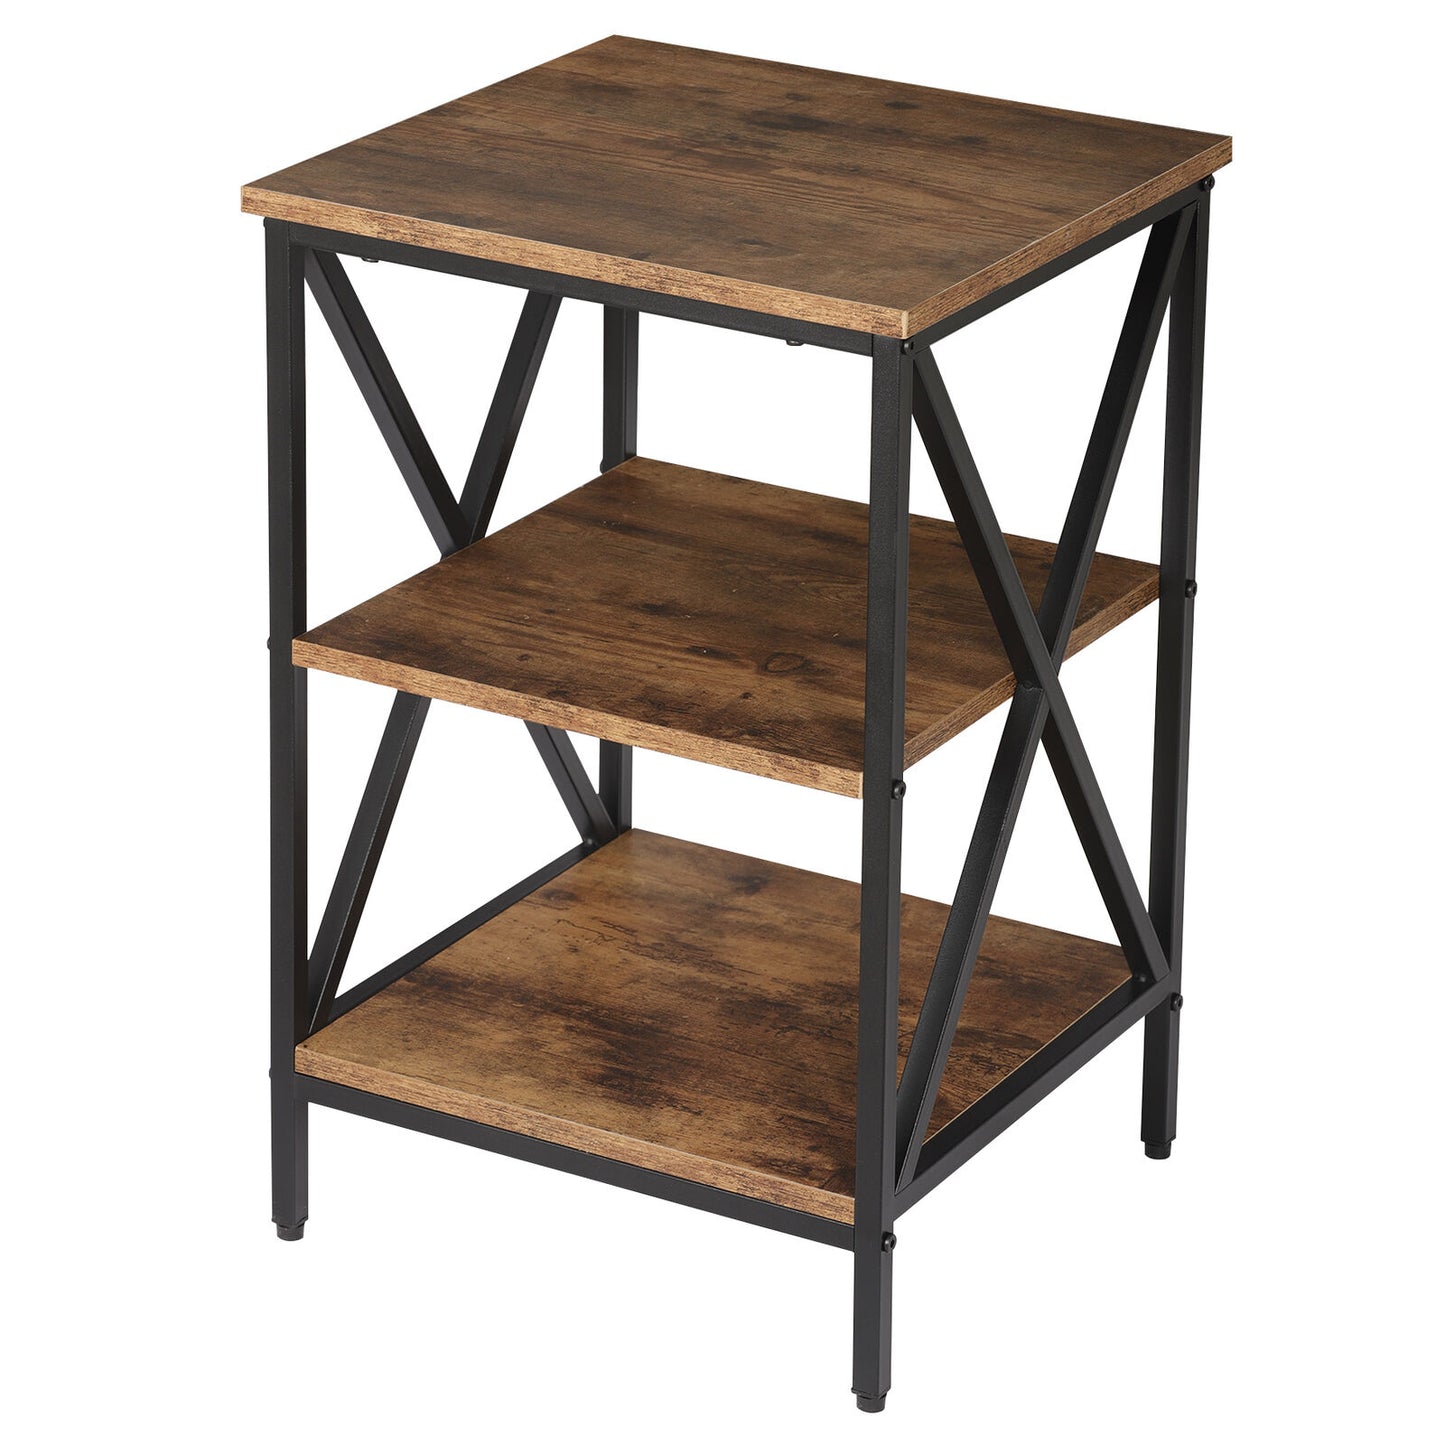 3-Tier Side Table X Design End Table Metal Frame W/Storage Shelves Rustic Brown